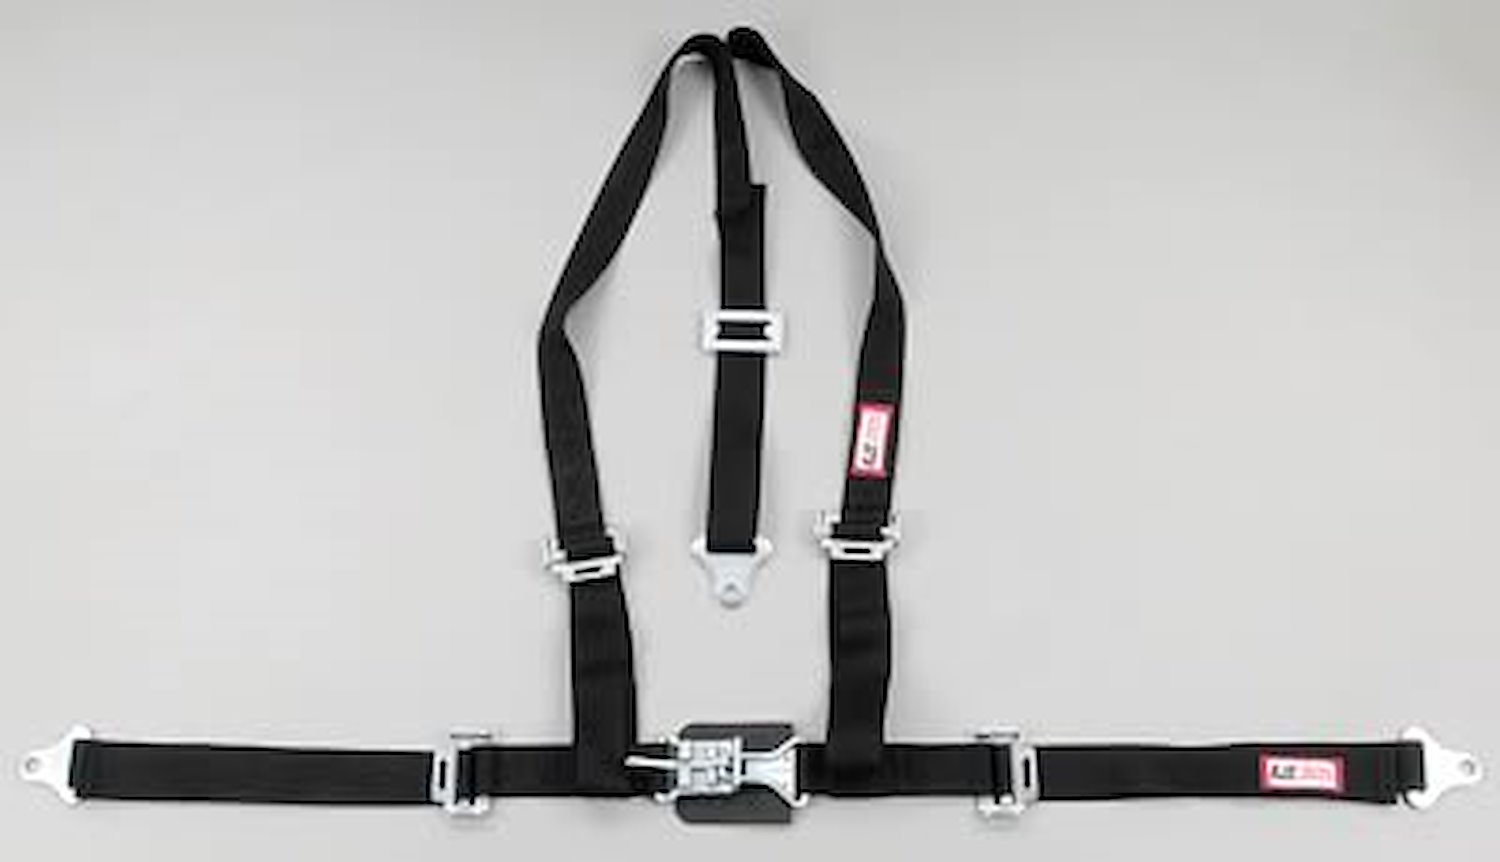 NON-SFI L&L HARNESS 3 PULL DOWN Lap Belt SNAP SEWN IN 2 S.H. Individual FLOOR Mount w/STERNUM STRAP WRAP/BOLT RED